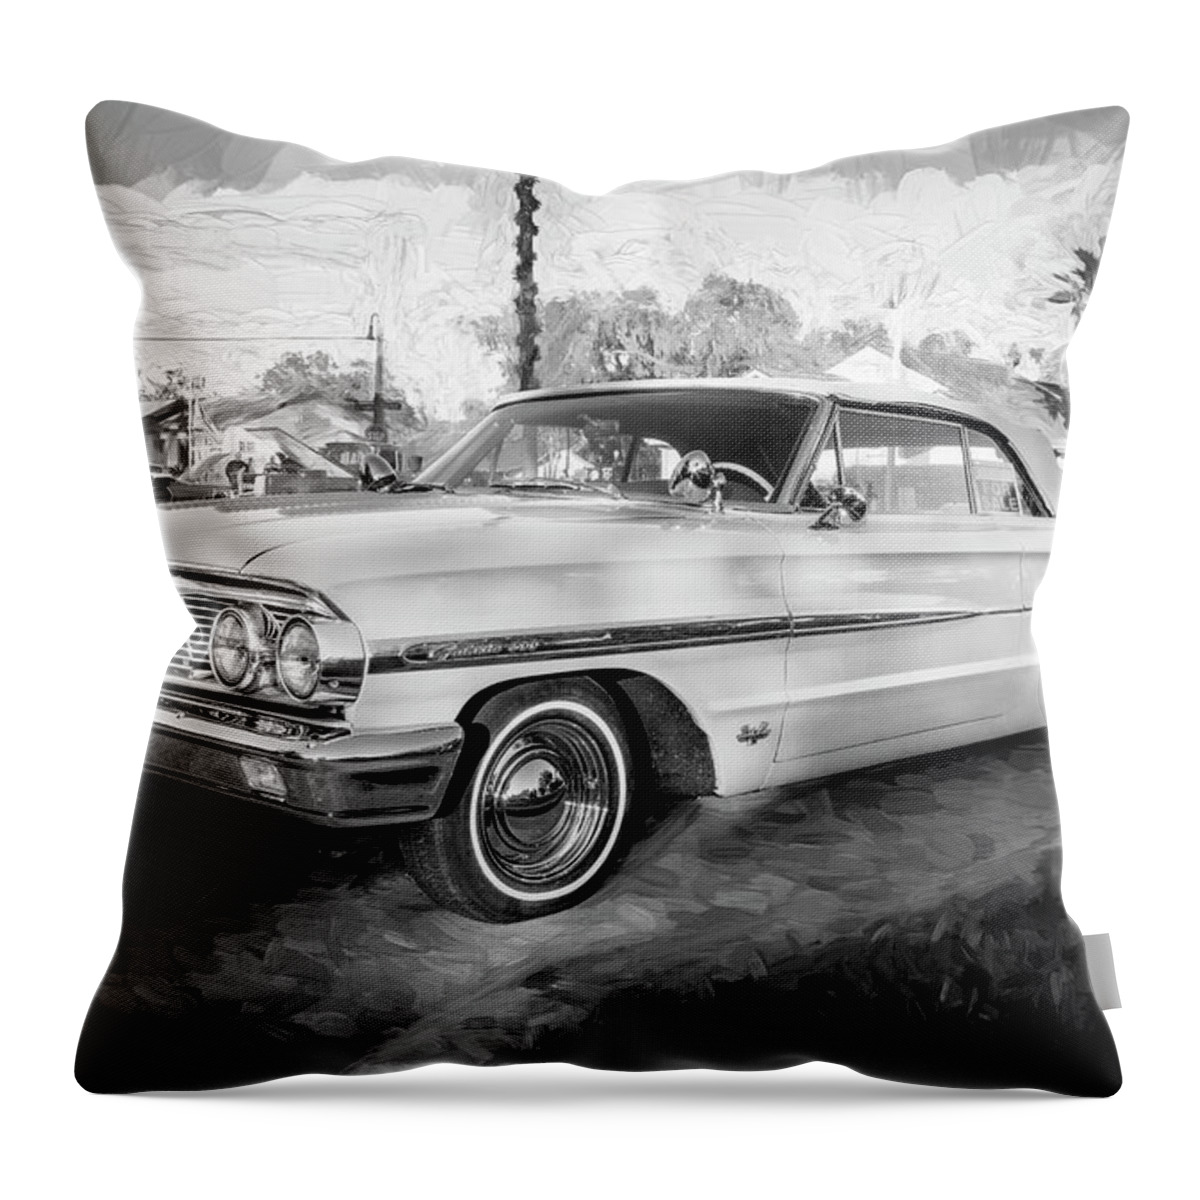 1964 Ford Galaxie 500 390 Engine Throw Pillow featuring the photograph 1964 Ford Galaxie 500 390 Engine X101 by Rich Franco